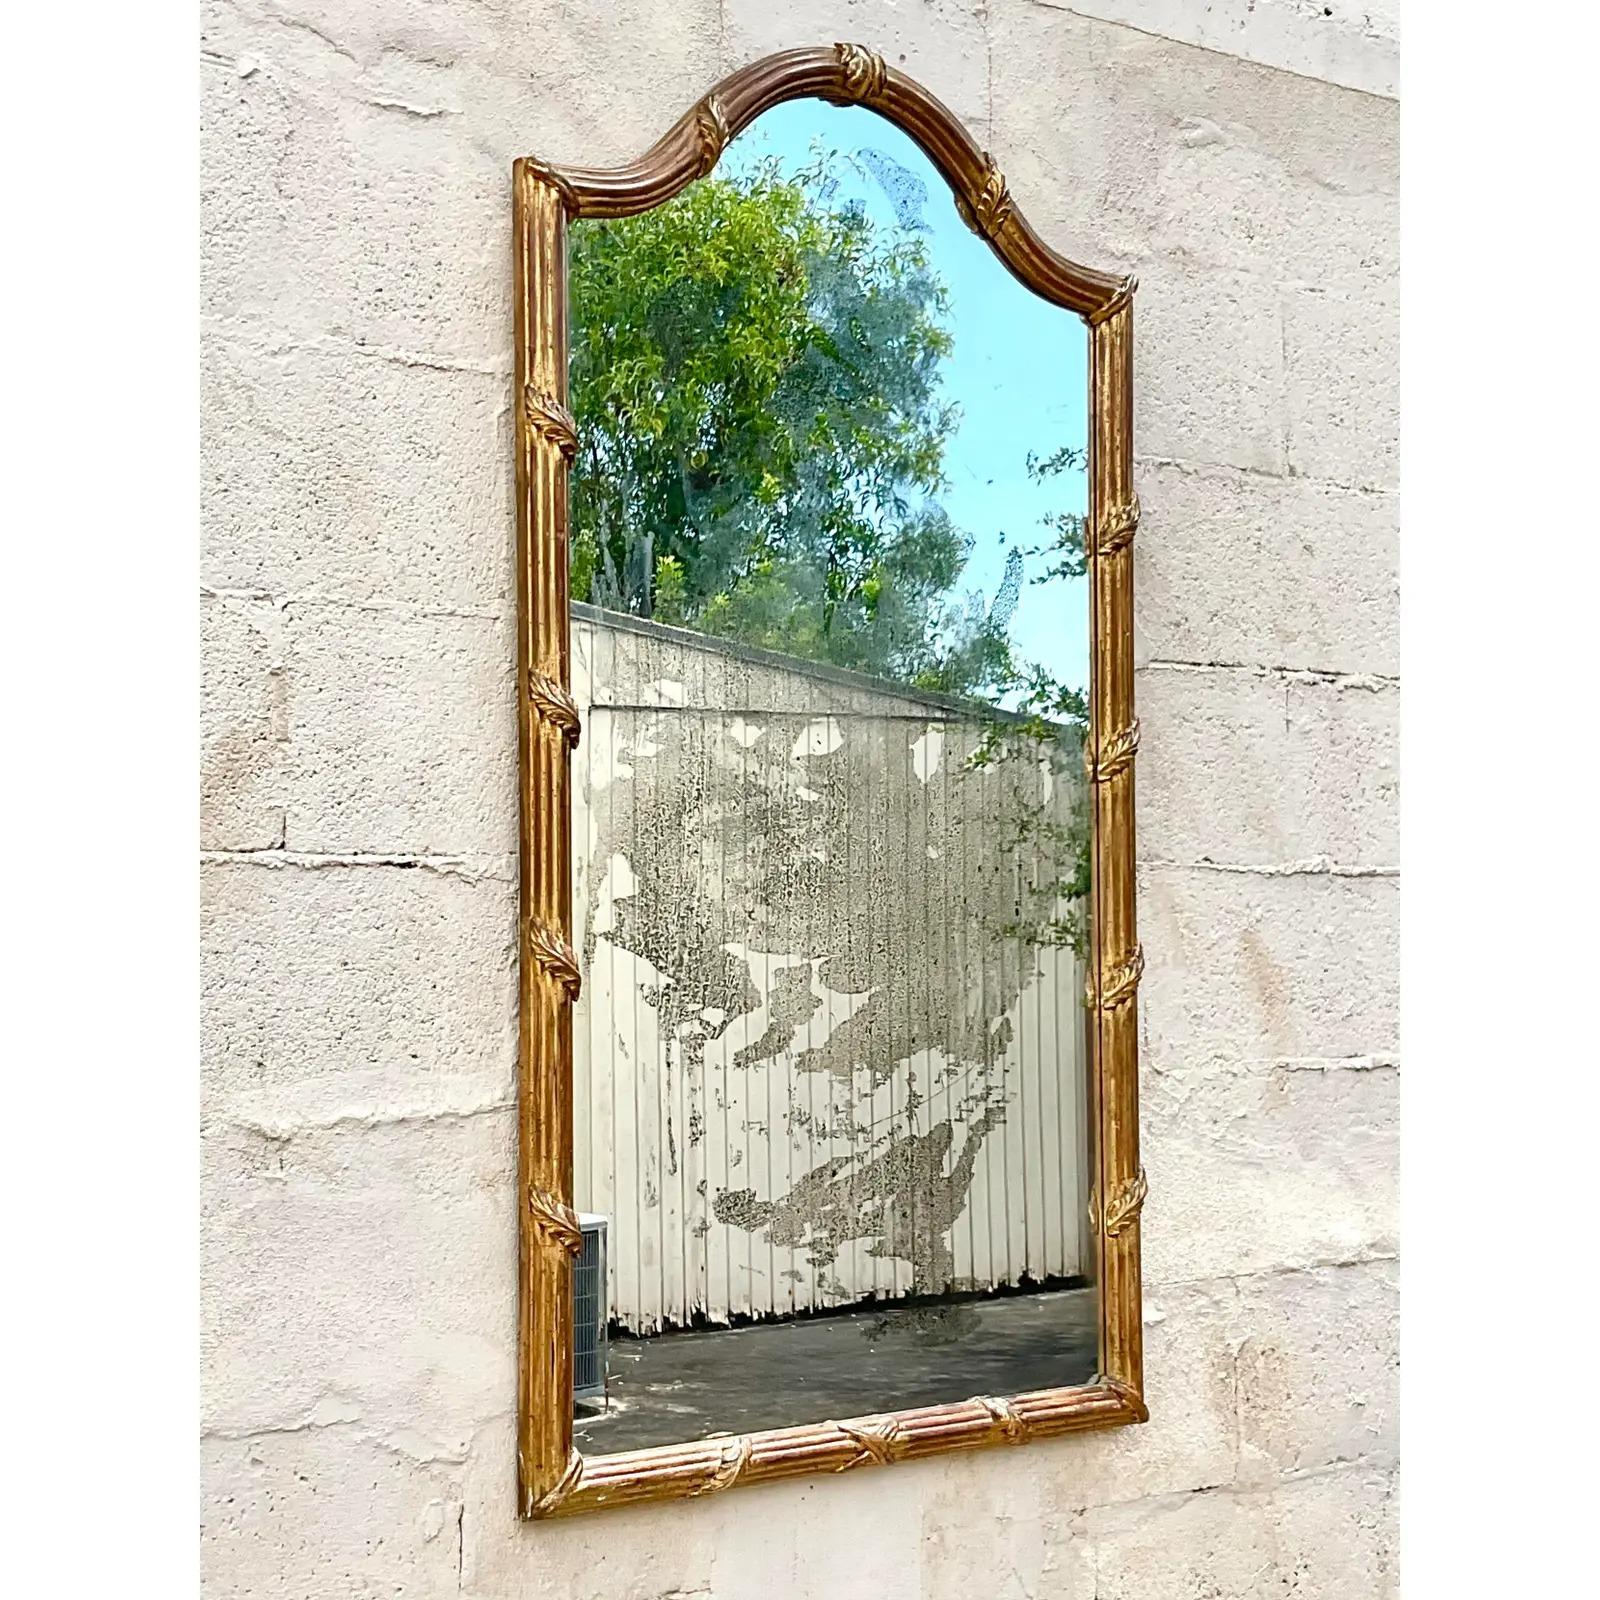 Gorgeous vintage vintage gilt wall mirror. Chic wrapped laurel detail on an arched frame. Incredible antiqued mirror really adds a dramatic touch. Acquired from a Palm Beach estate.